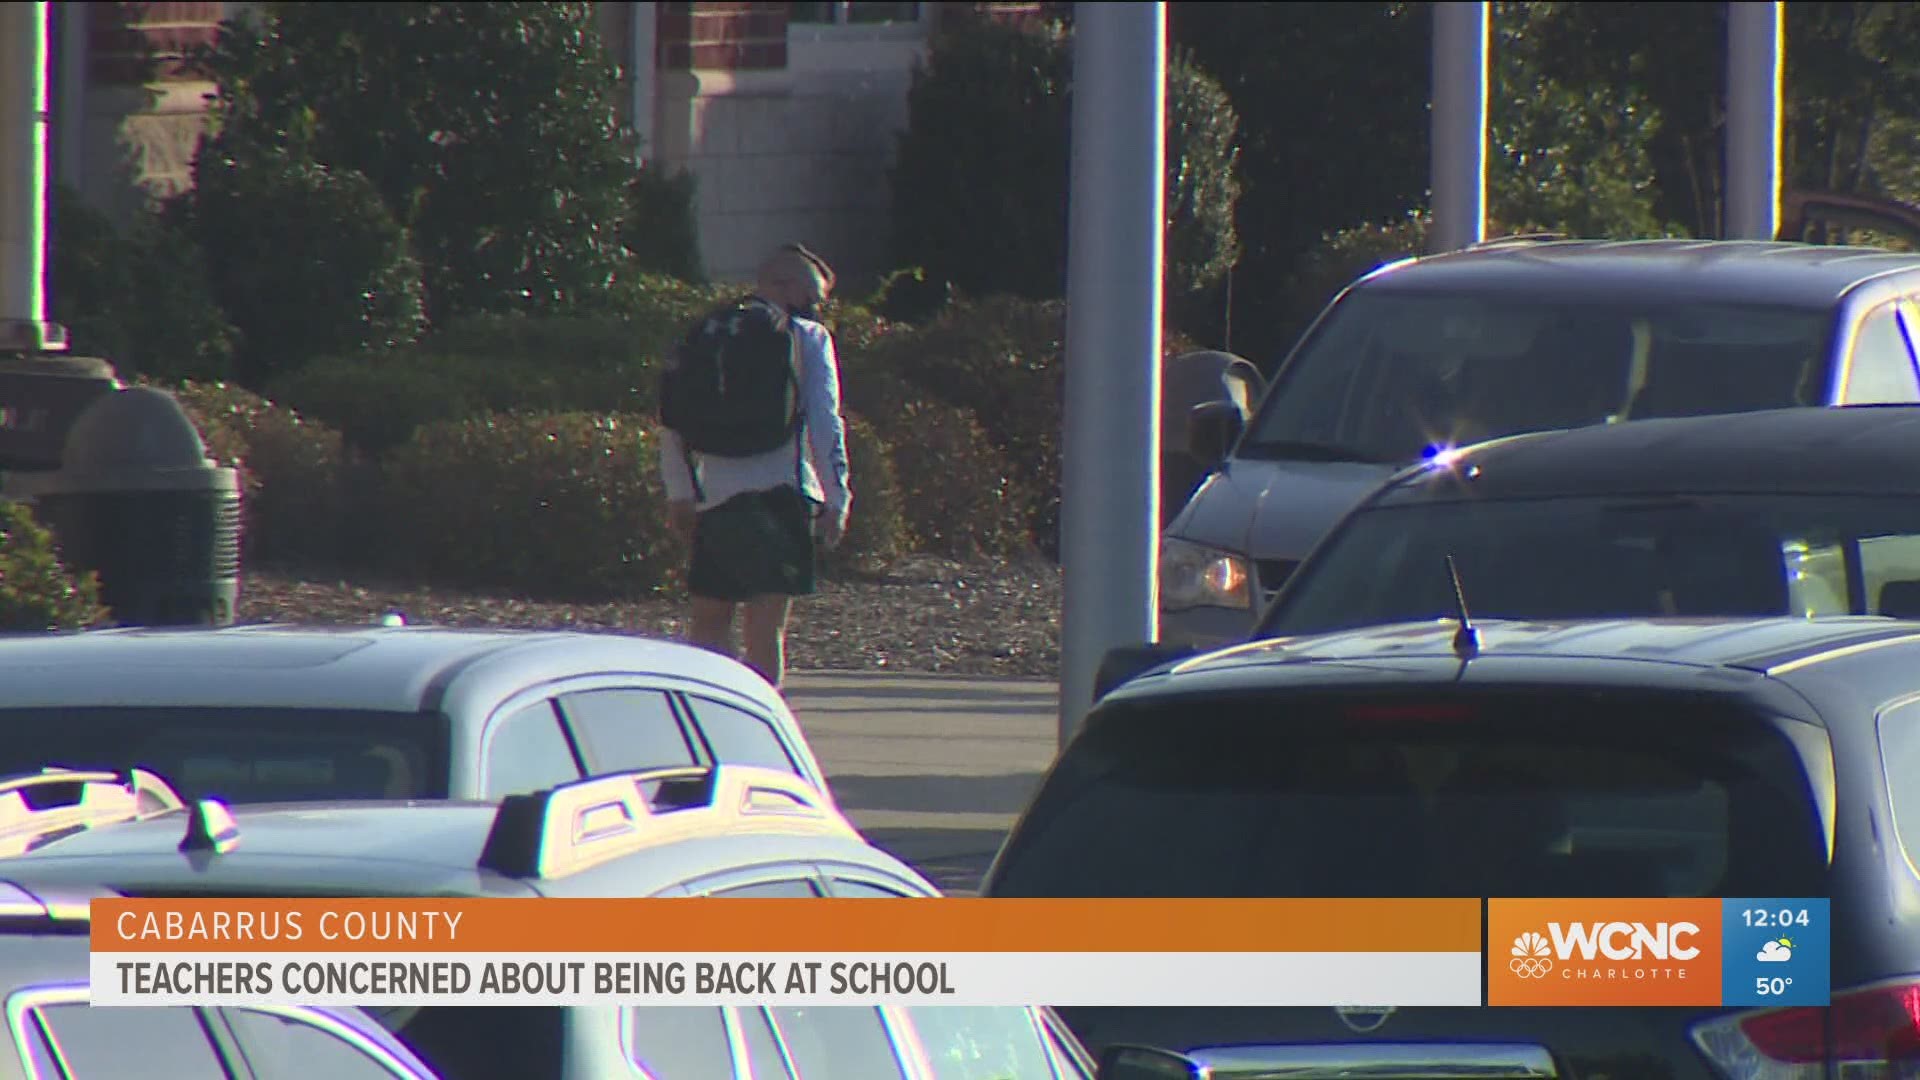 Some teachers in Cabarrus County say they have concerns about students returning to school for in-person learning this week.